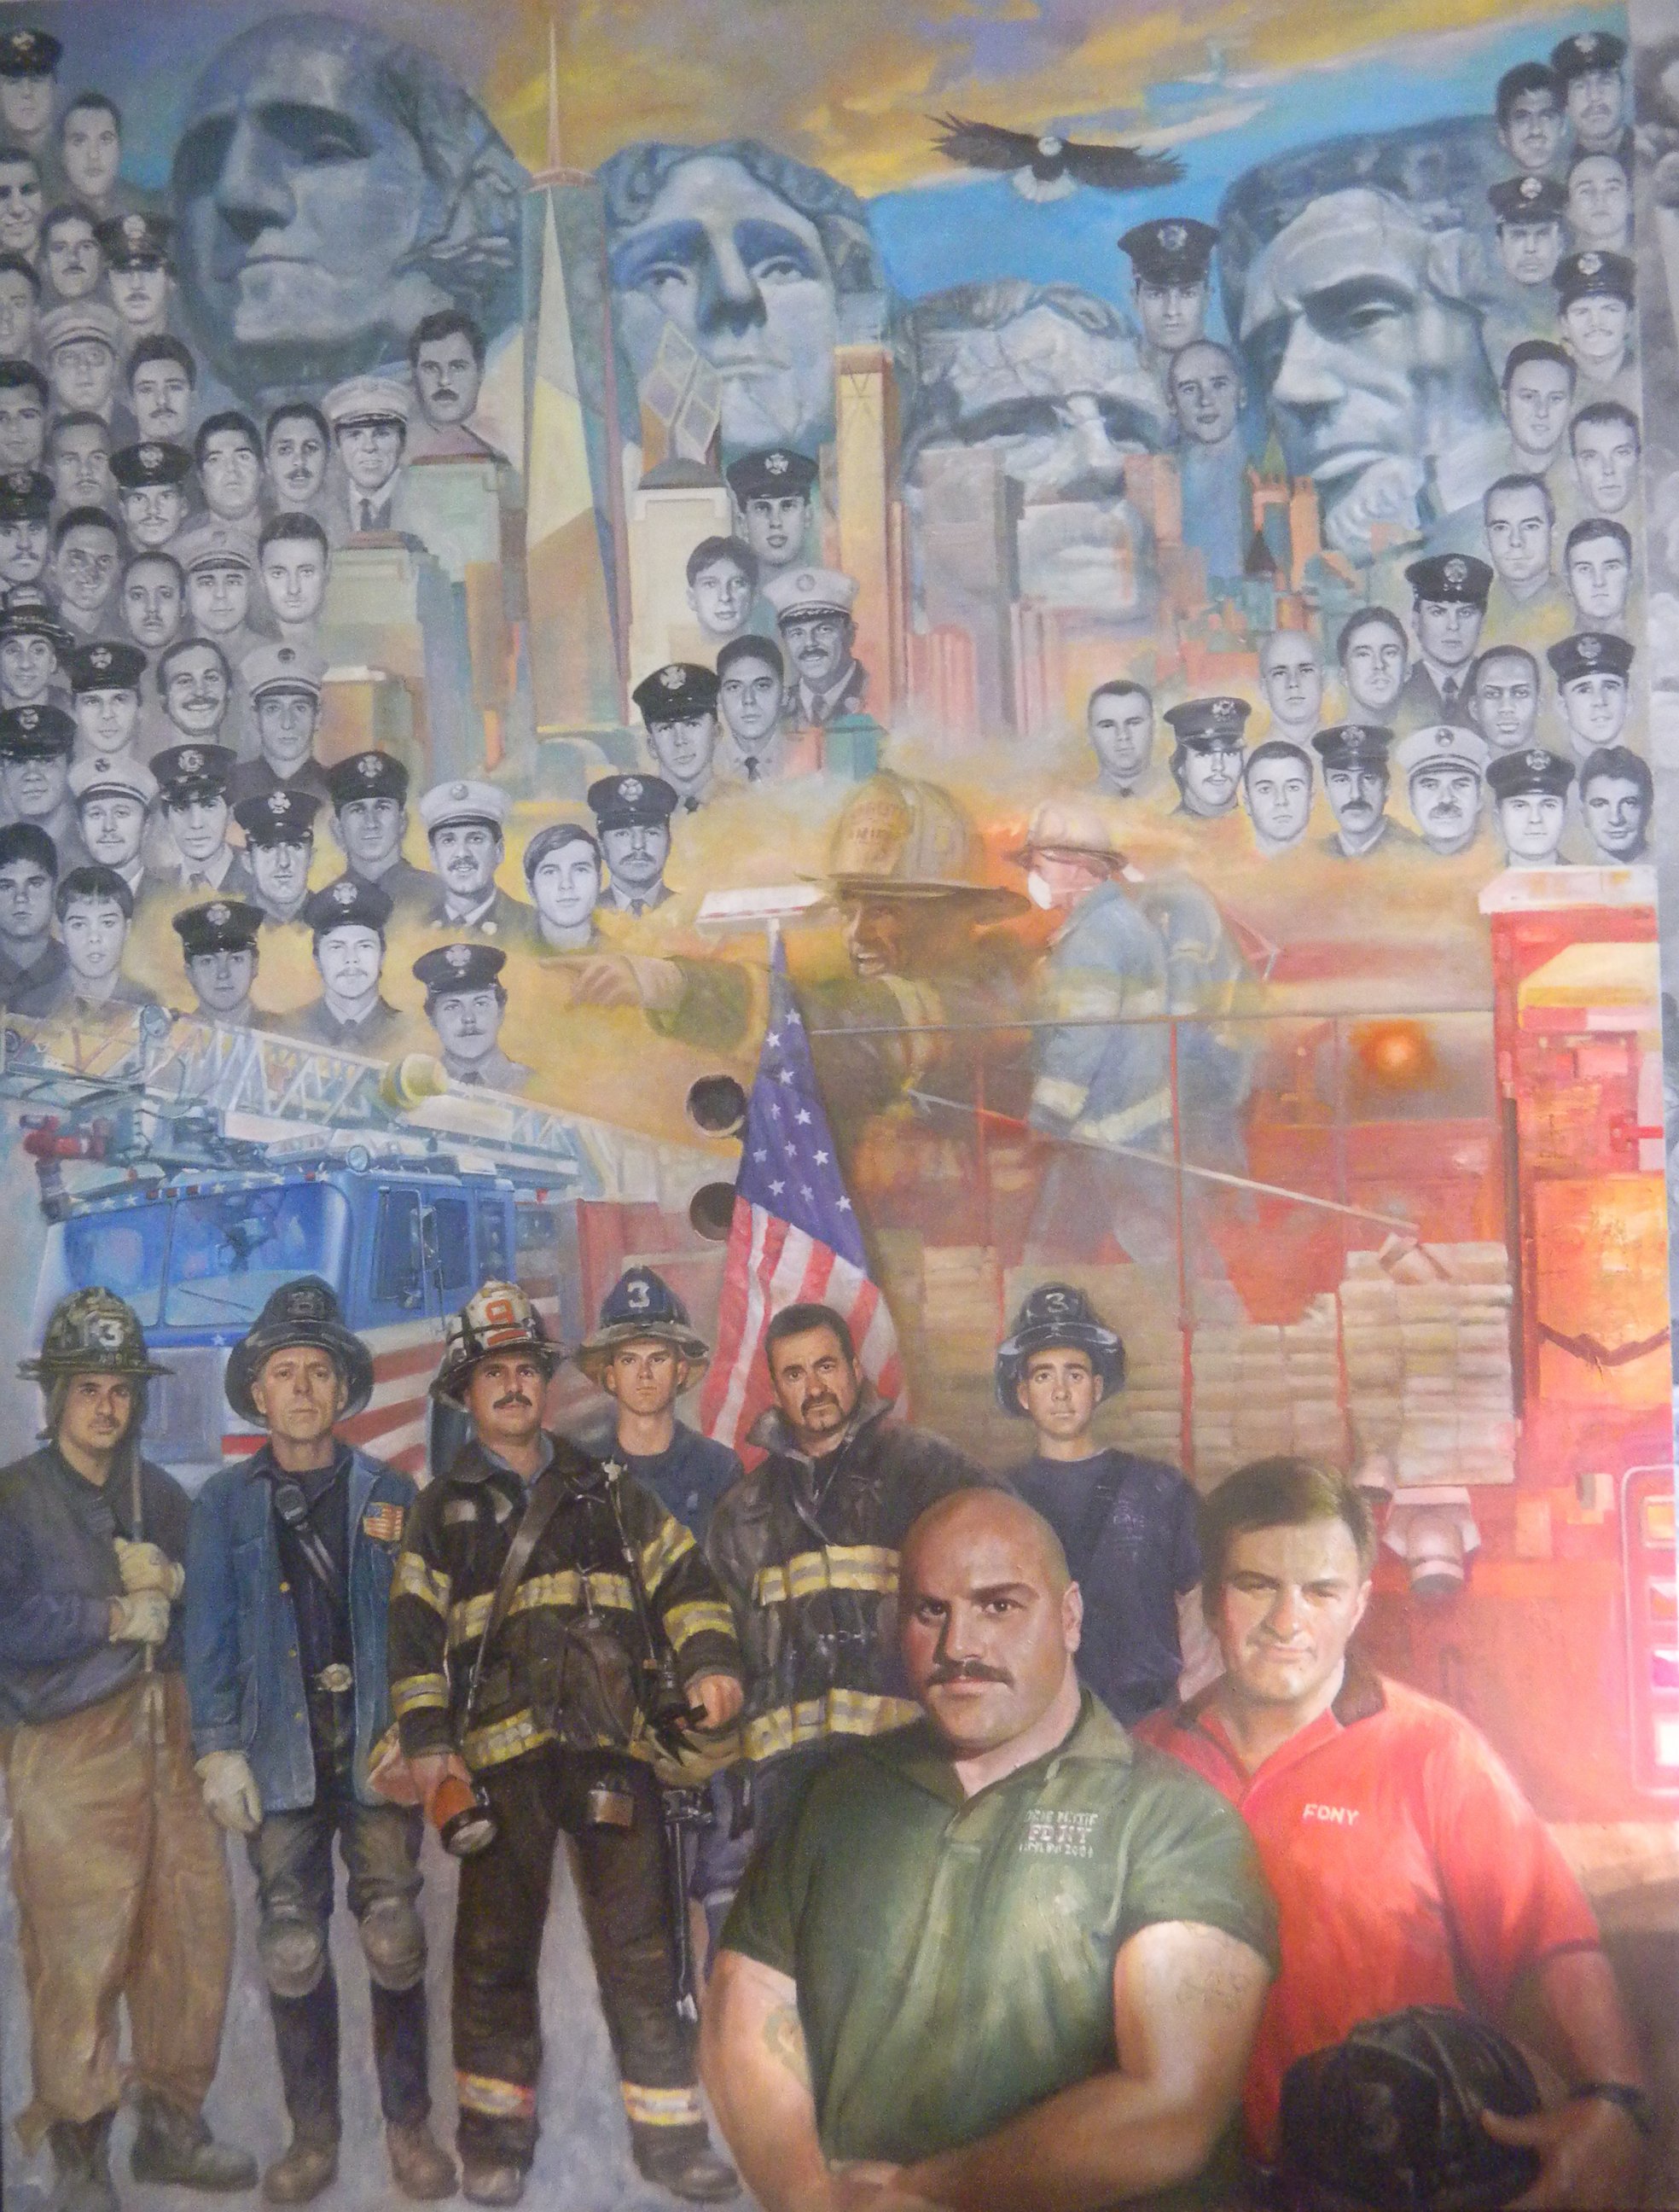 PHOTO: Yang said he painted the mural because he wanted to do something for the American people.